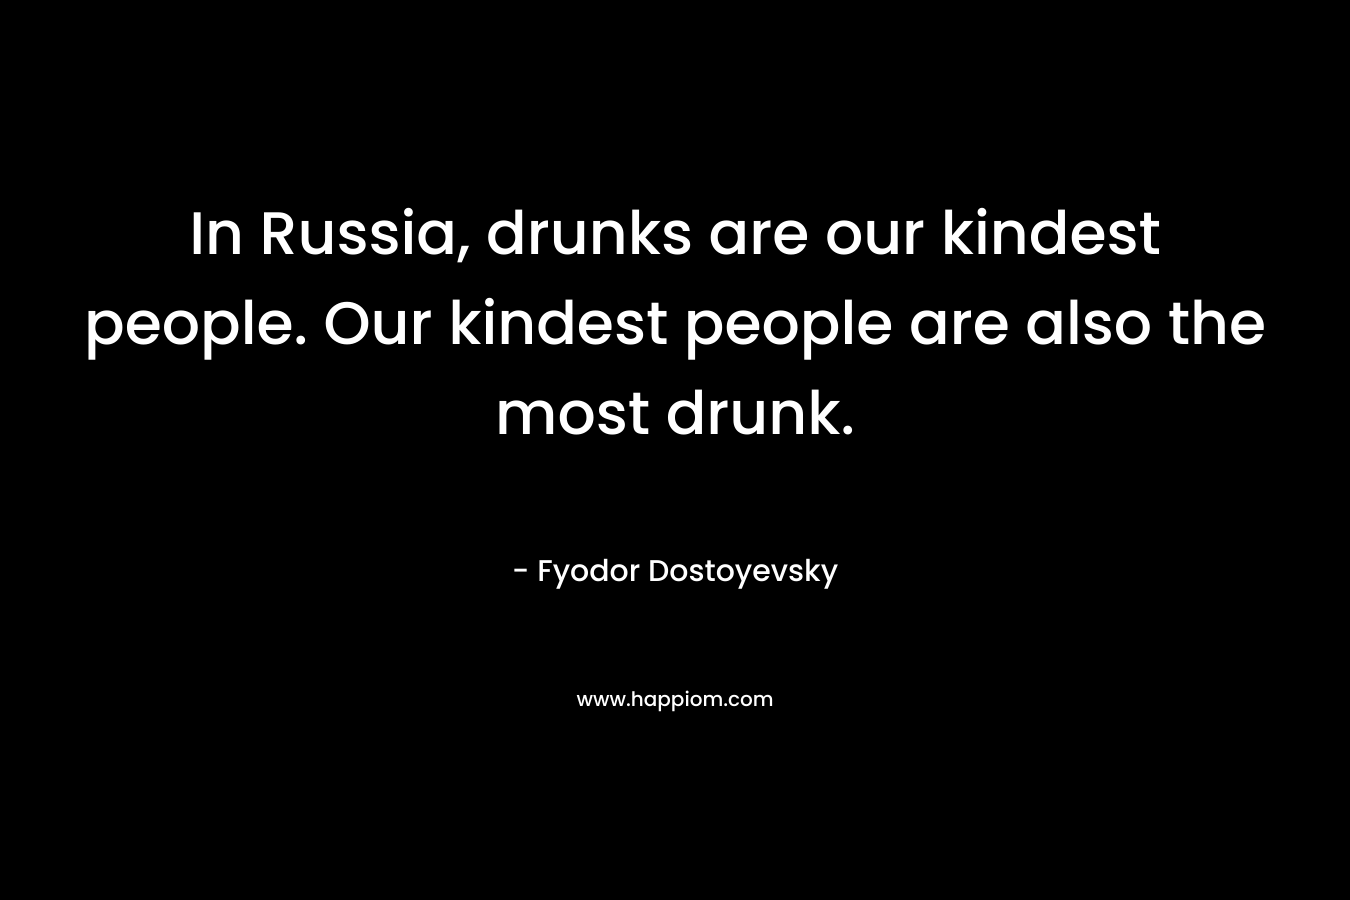 In Russia, drunks are our kindest people. Our kindest people are also the most drunk.